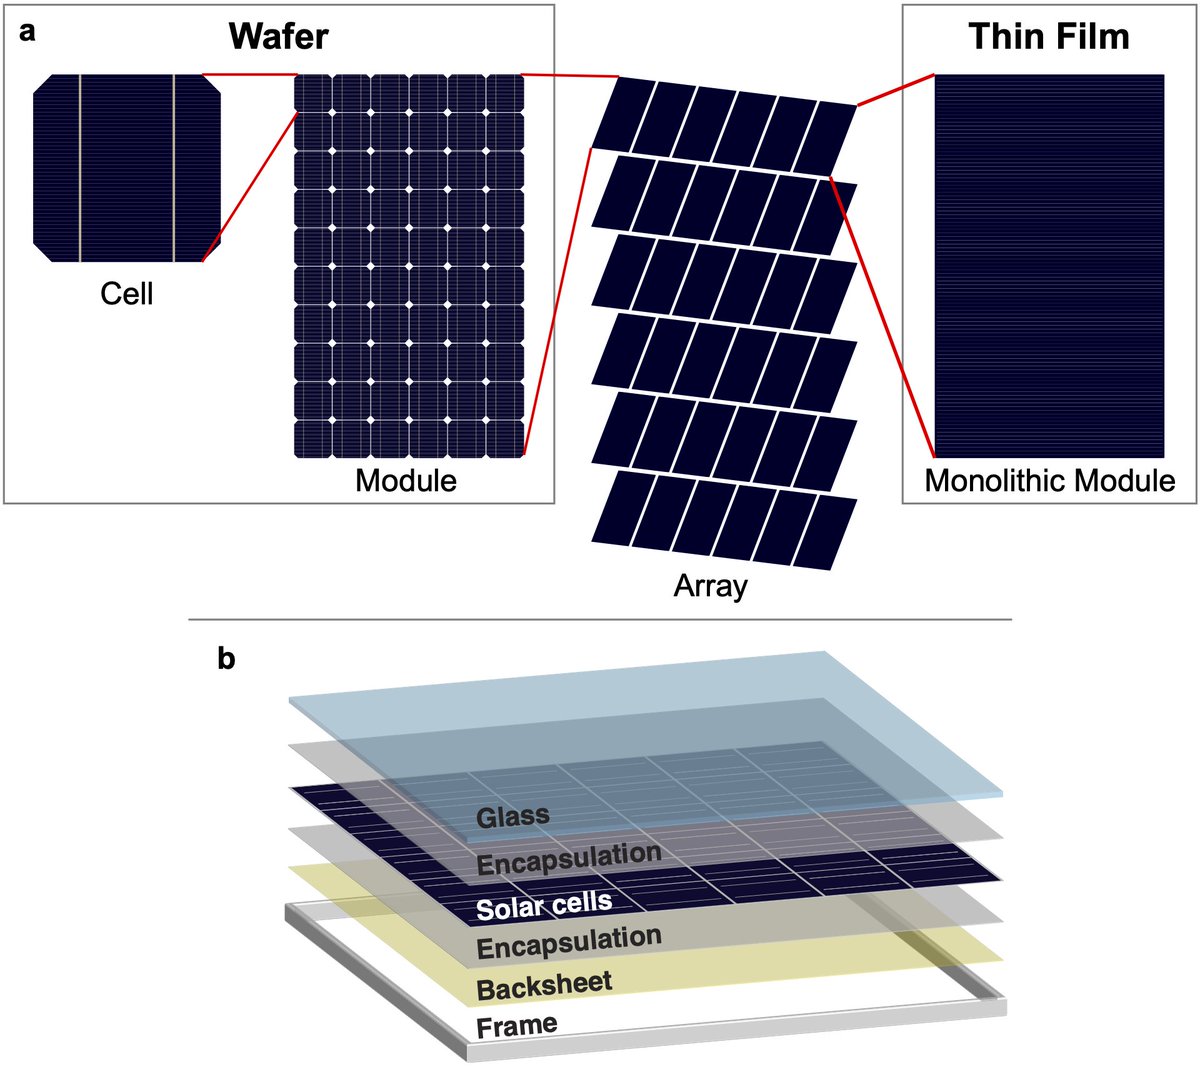 A few key terms: For wafer-based tech (crystalline silicon), each wafer is a solar cell. Many cells are tiled into a module or panel. For thin-film tech (CdTe, perovskites), all the cells in a module can be made at the same time. A PV system/array consists of many solar panels.